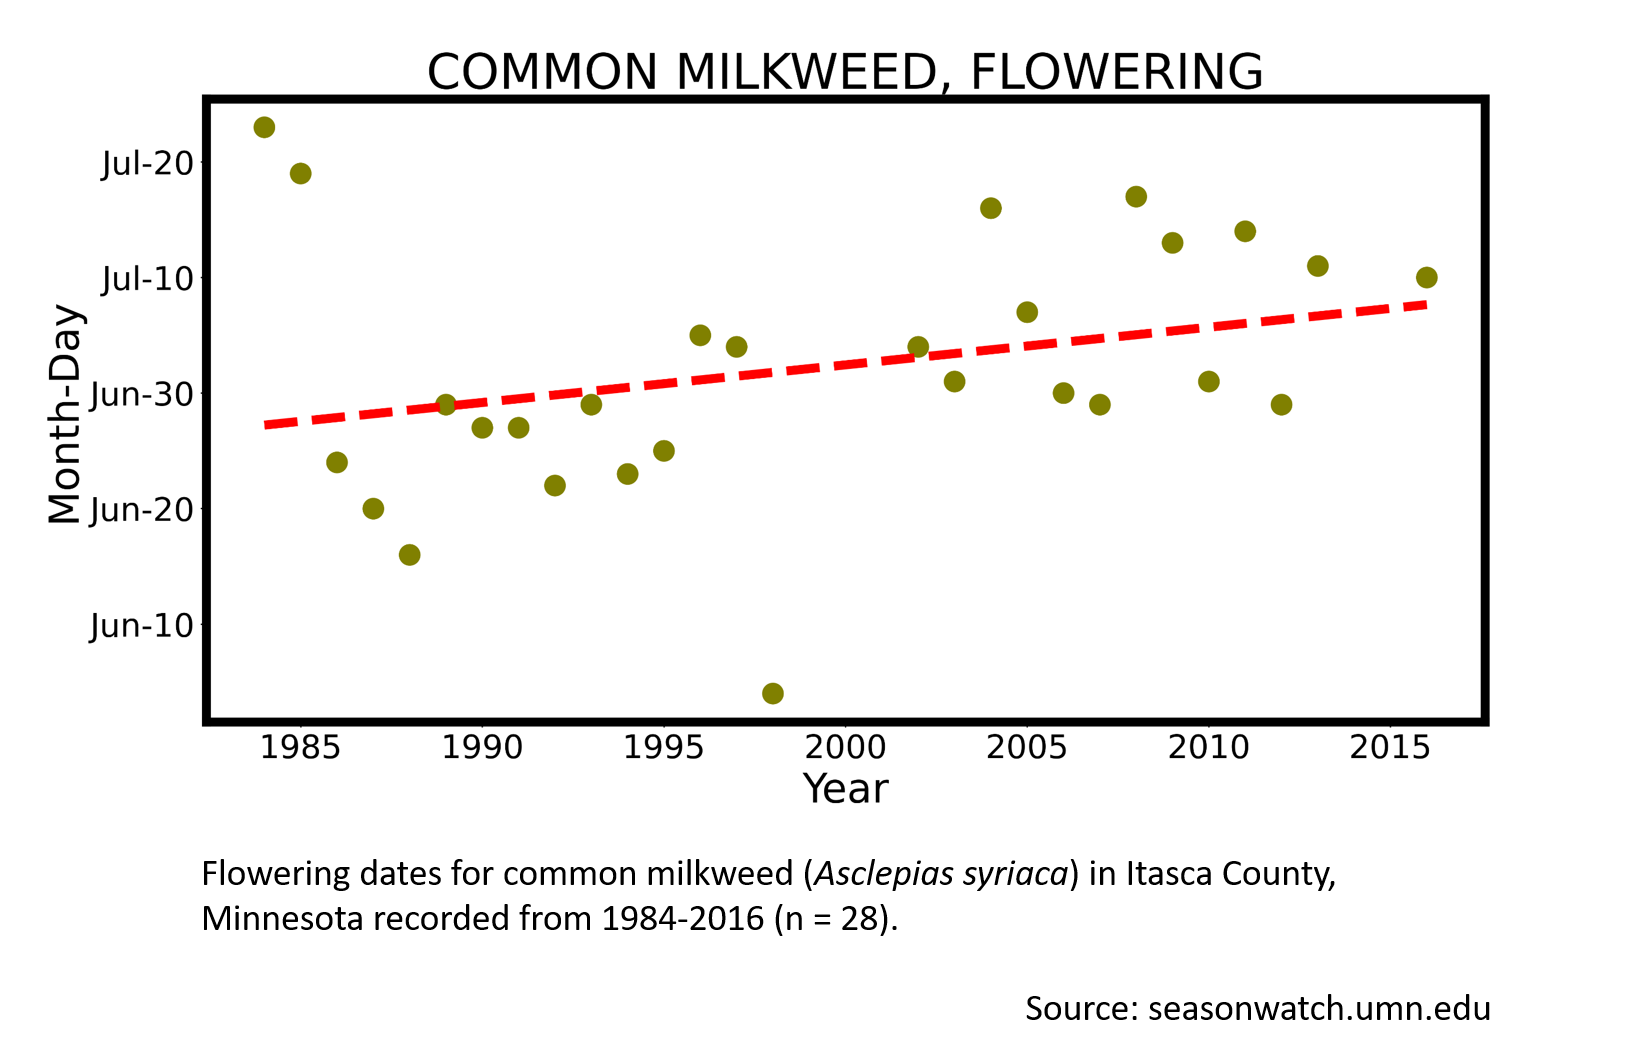 Scatterplot showing common milkweed phenology observations in Itasca County, Minnesota